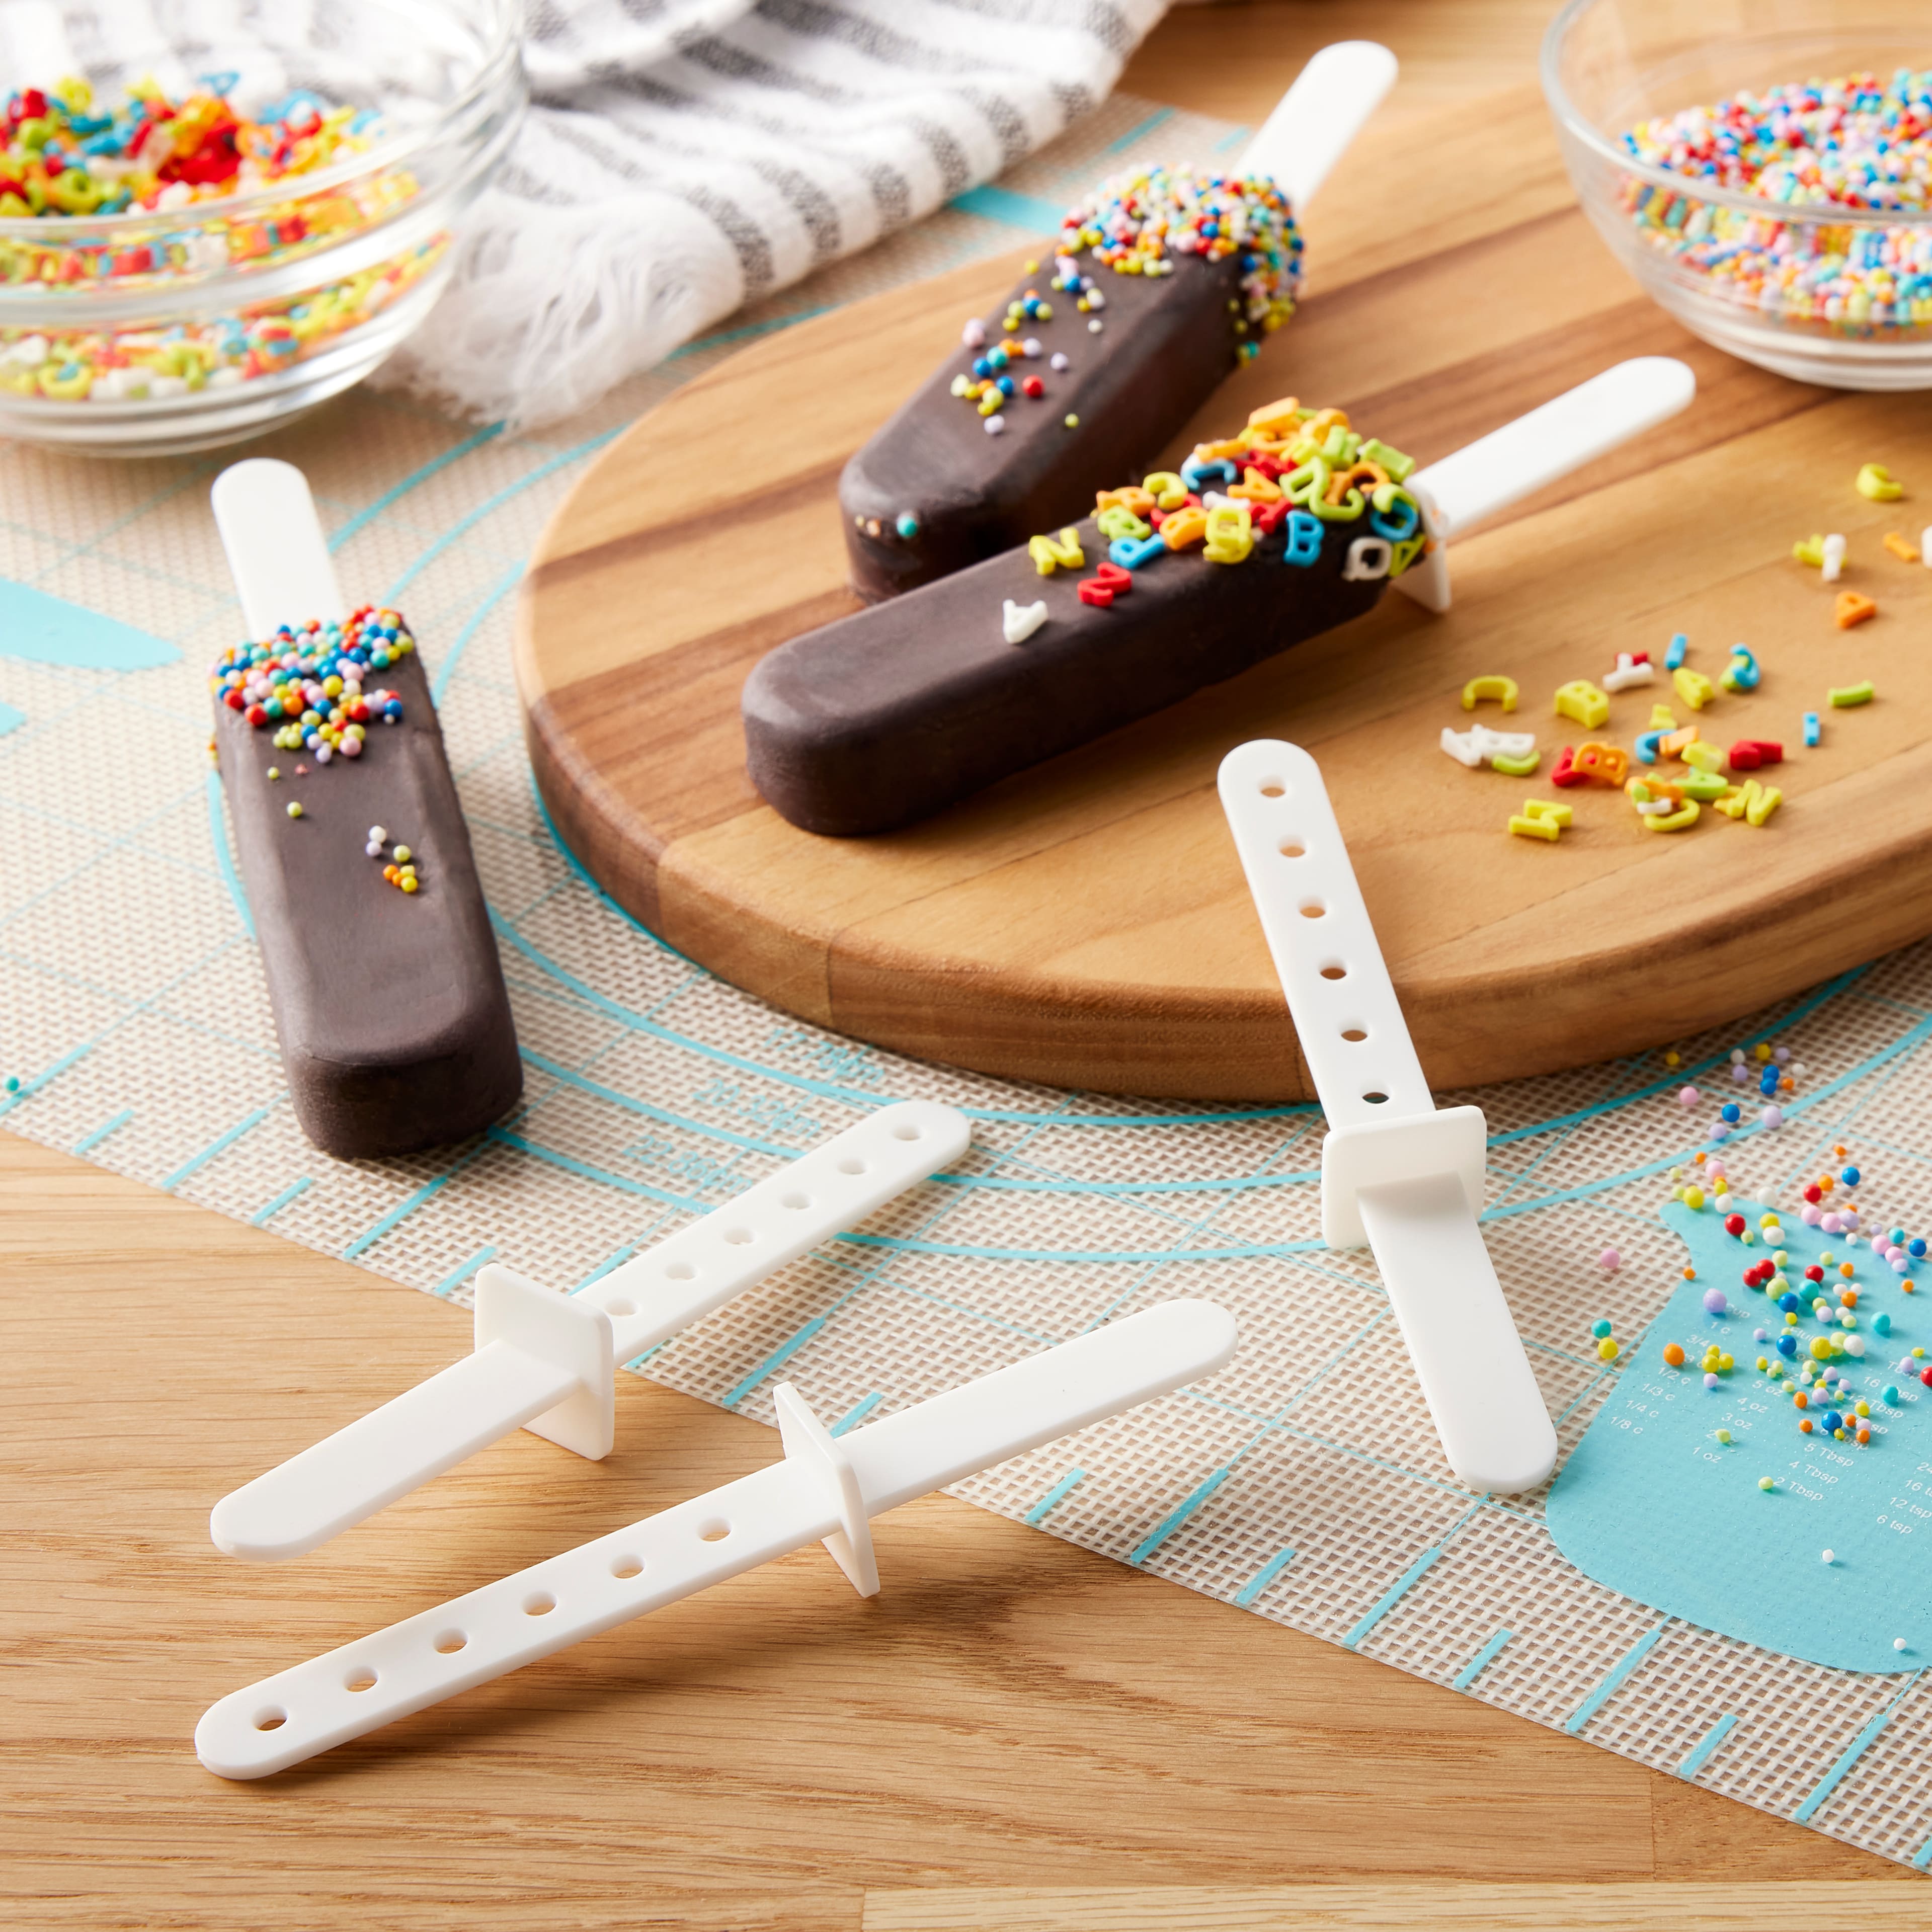 10 Best Reusable Popsicle Sticks 2023, There's One Clear Winner